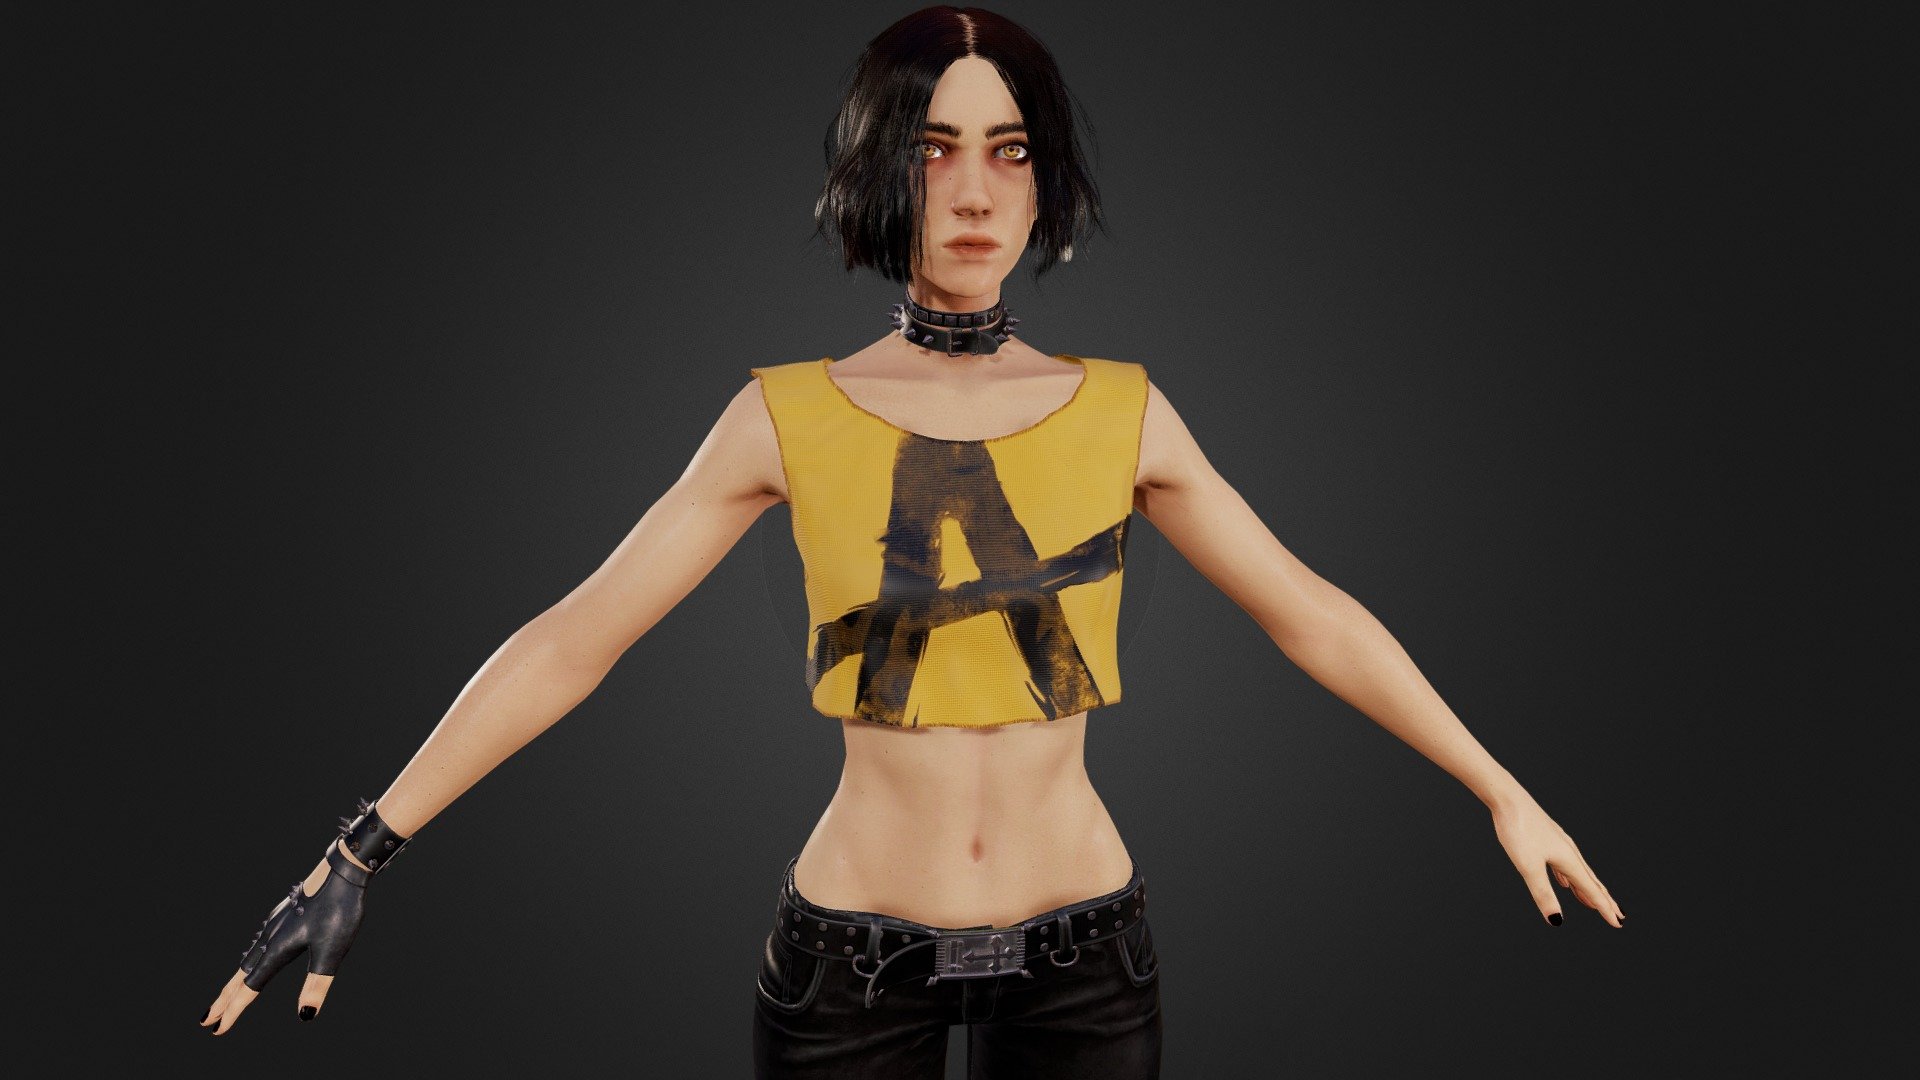 work in progress of a punkish character i'm working on - WIP - Julia - 3D model by Rukha93 3d model